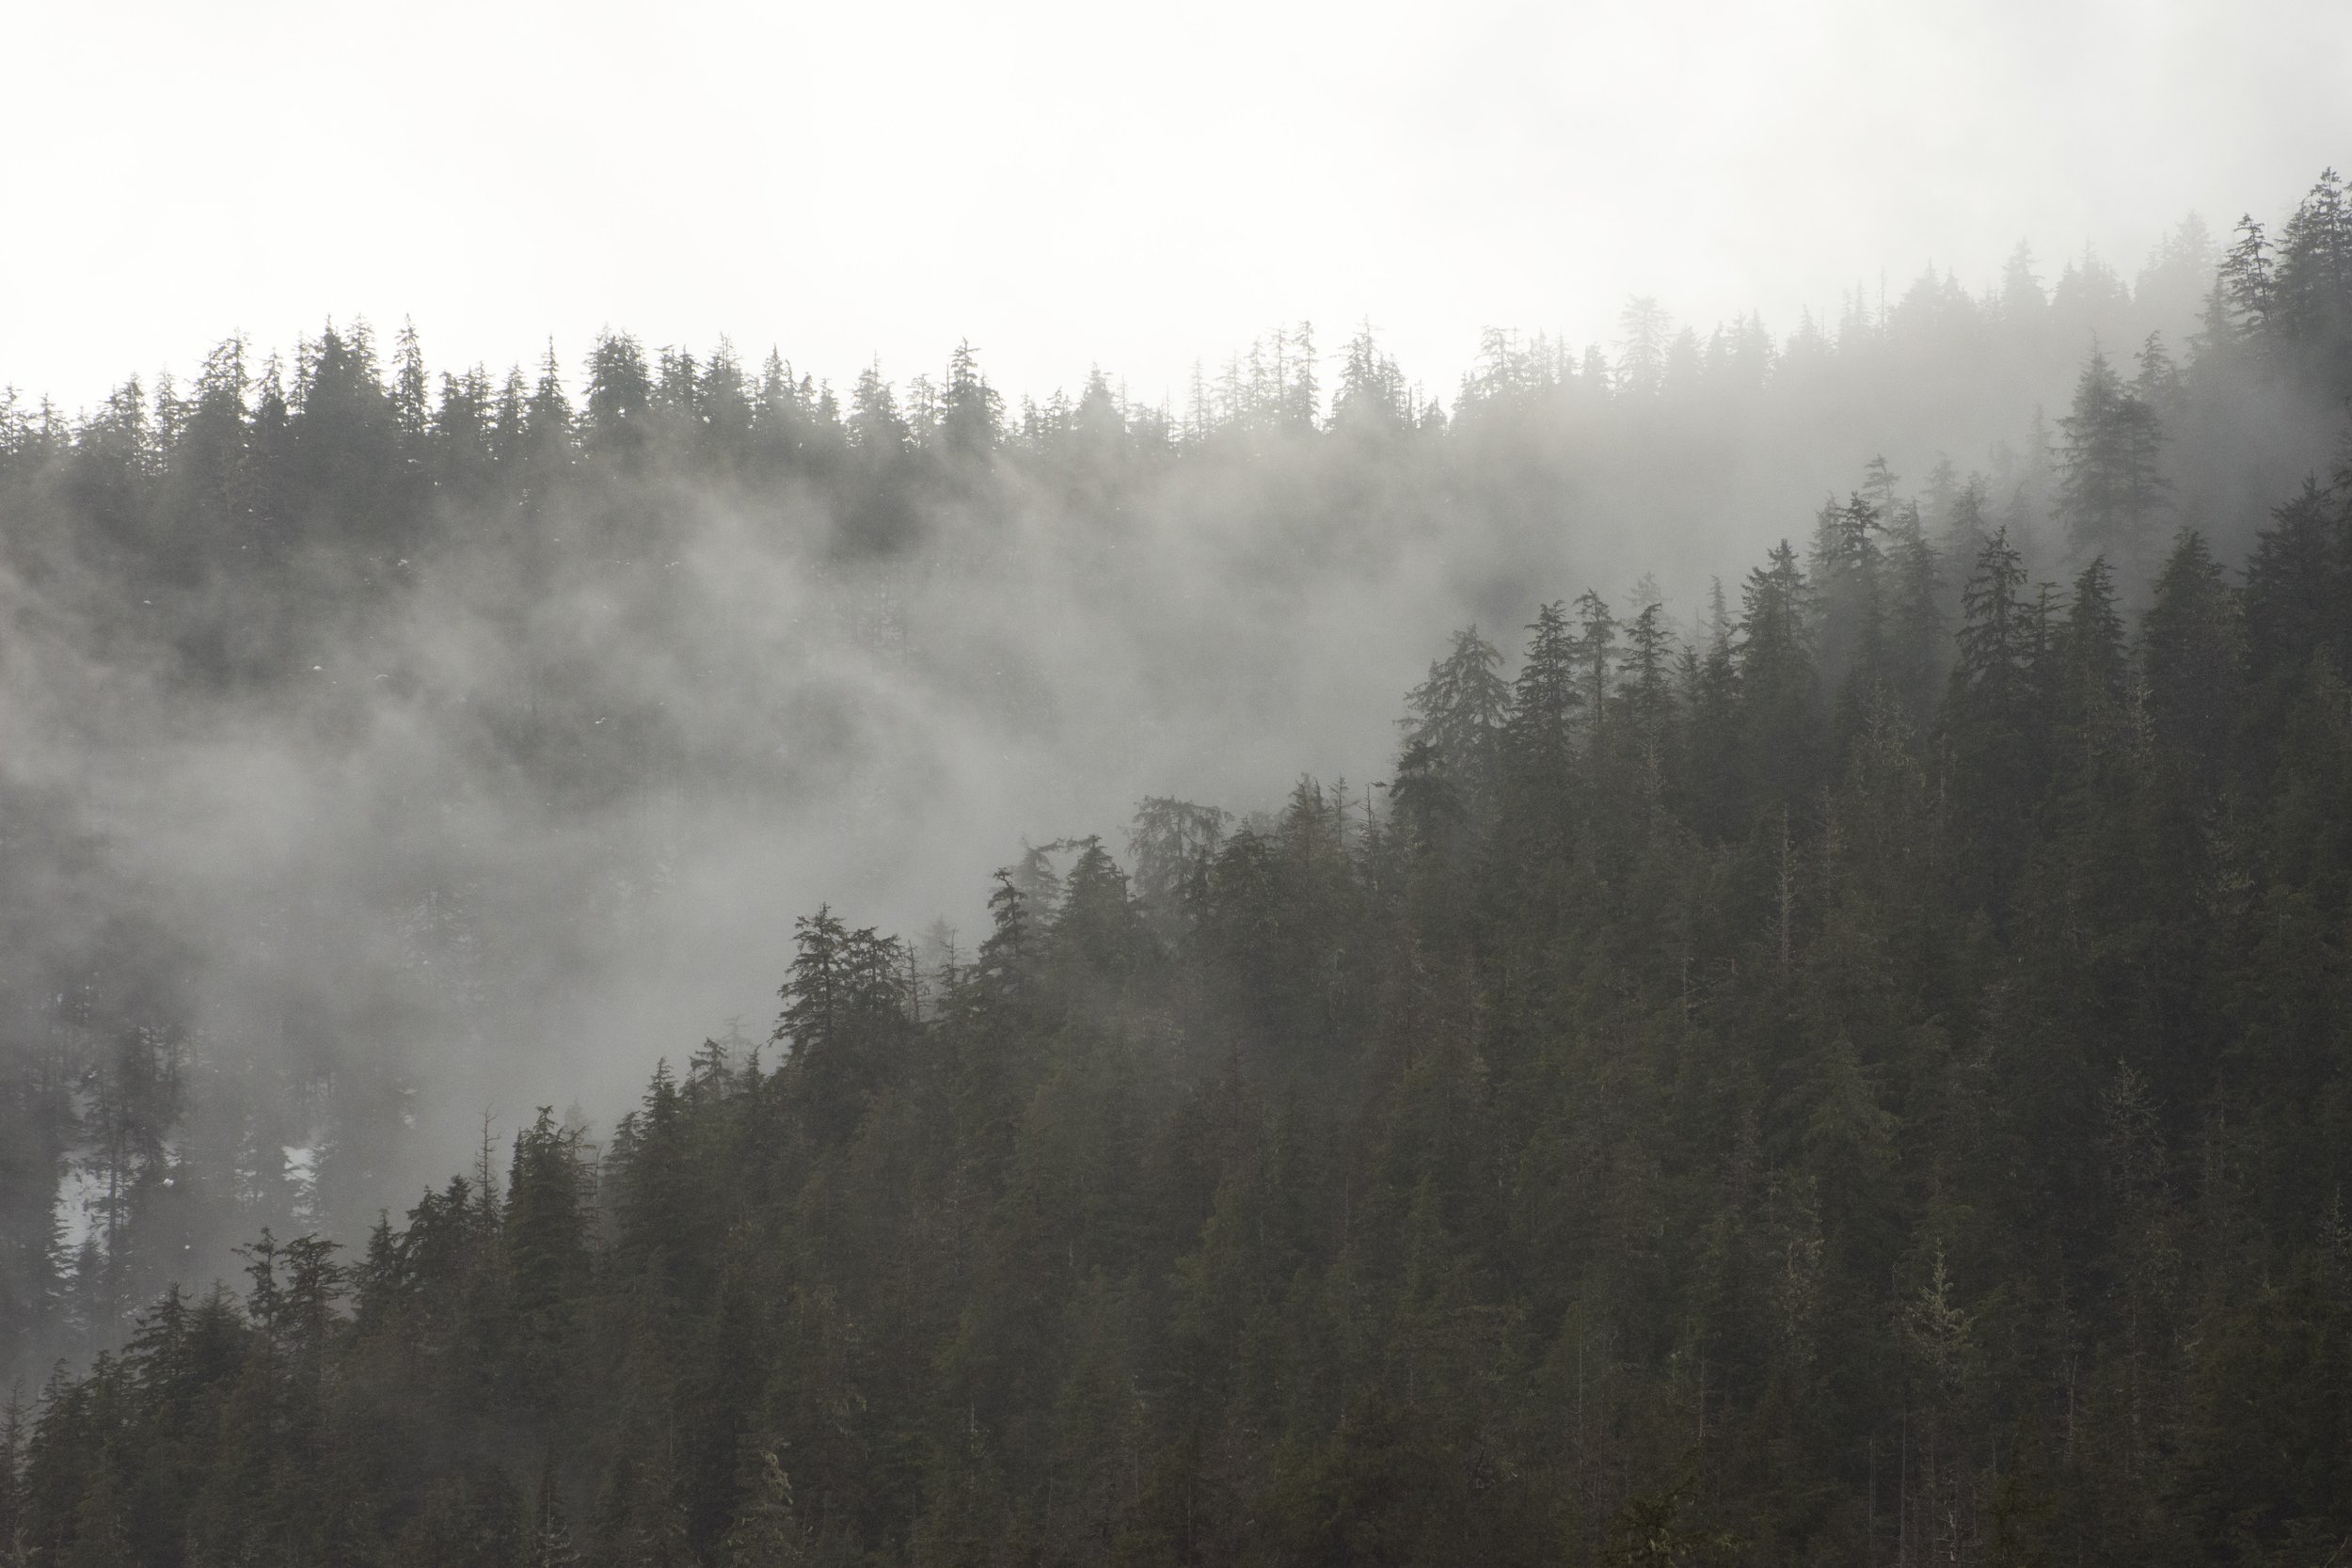 Treed mountains with mist settling in between.